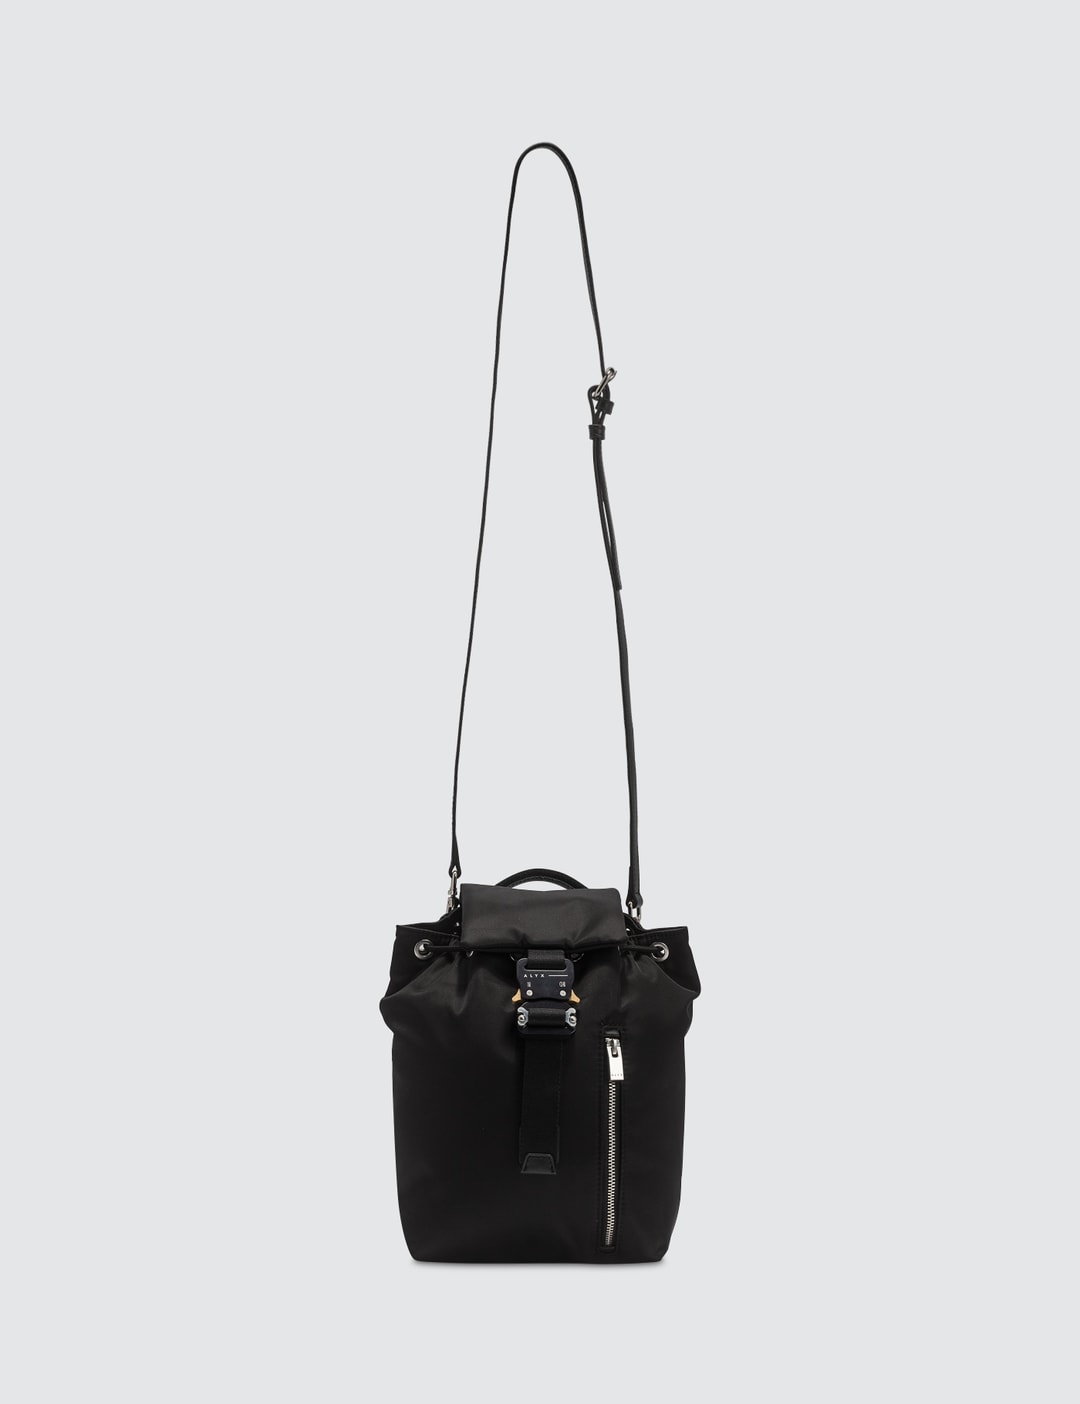 1017 ALYX 9SM - Baby-X Bag | HBX - Globally Curated Fashion and ...